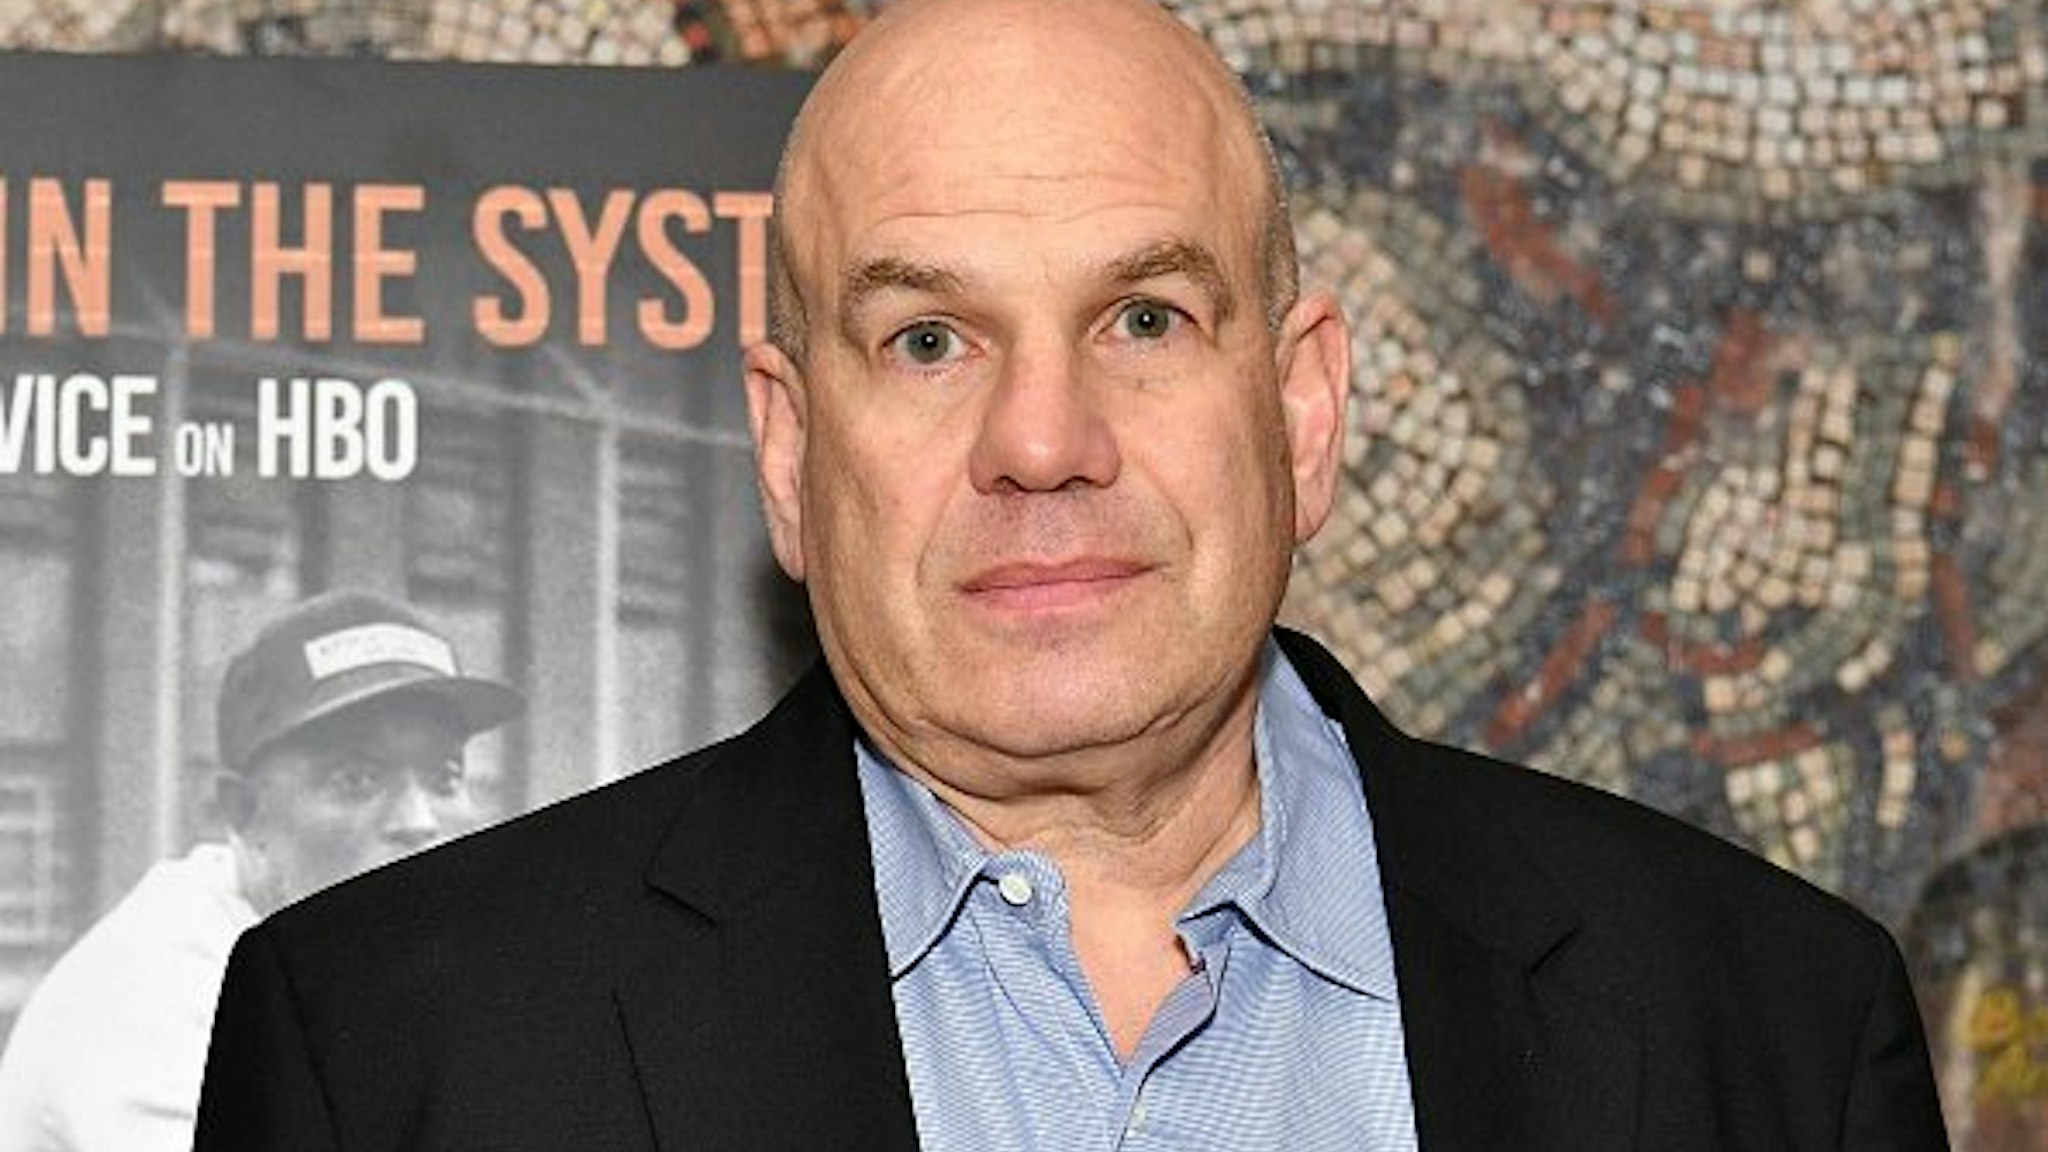 David Simon attends the "Vice" Season 6 Premiere at the Whitby Hotel on April 3, 2018 in New York City.